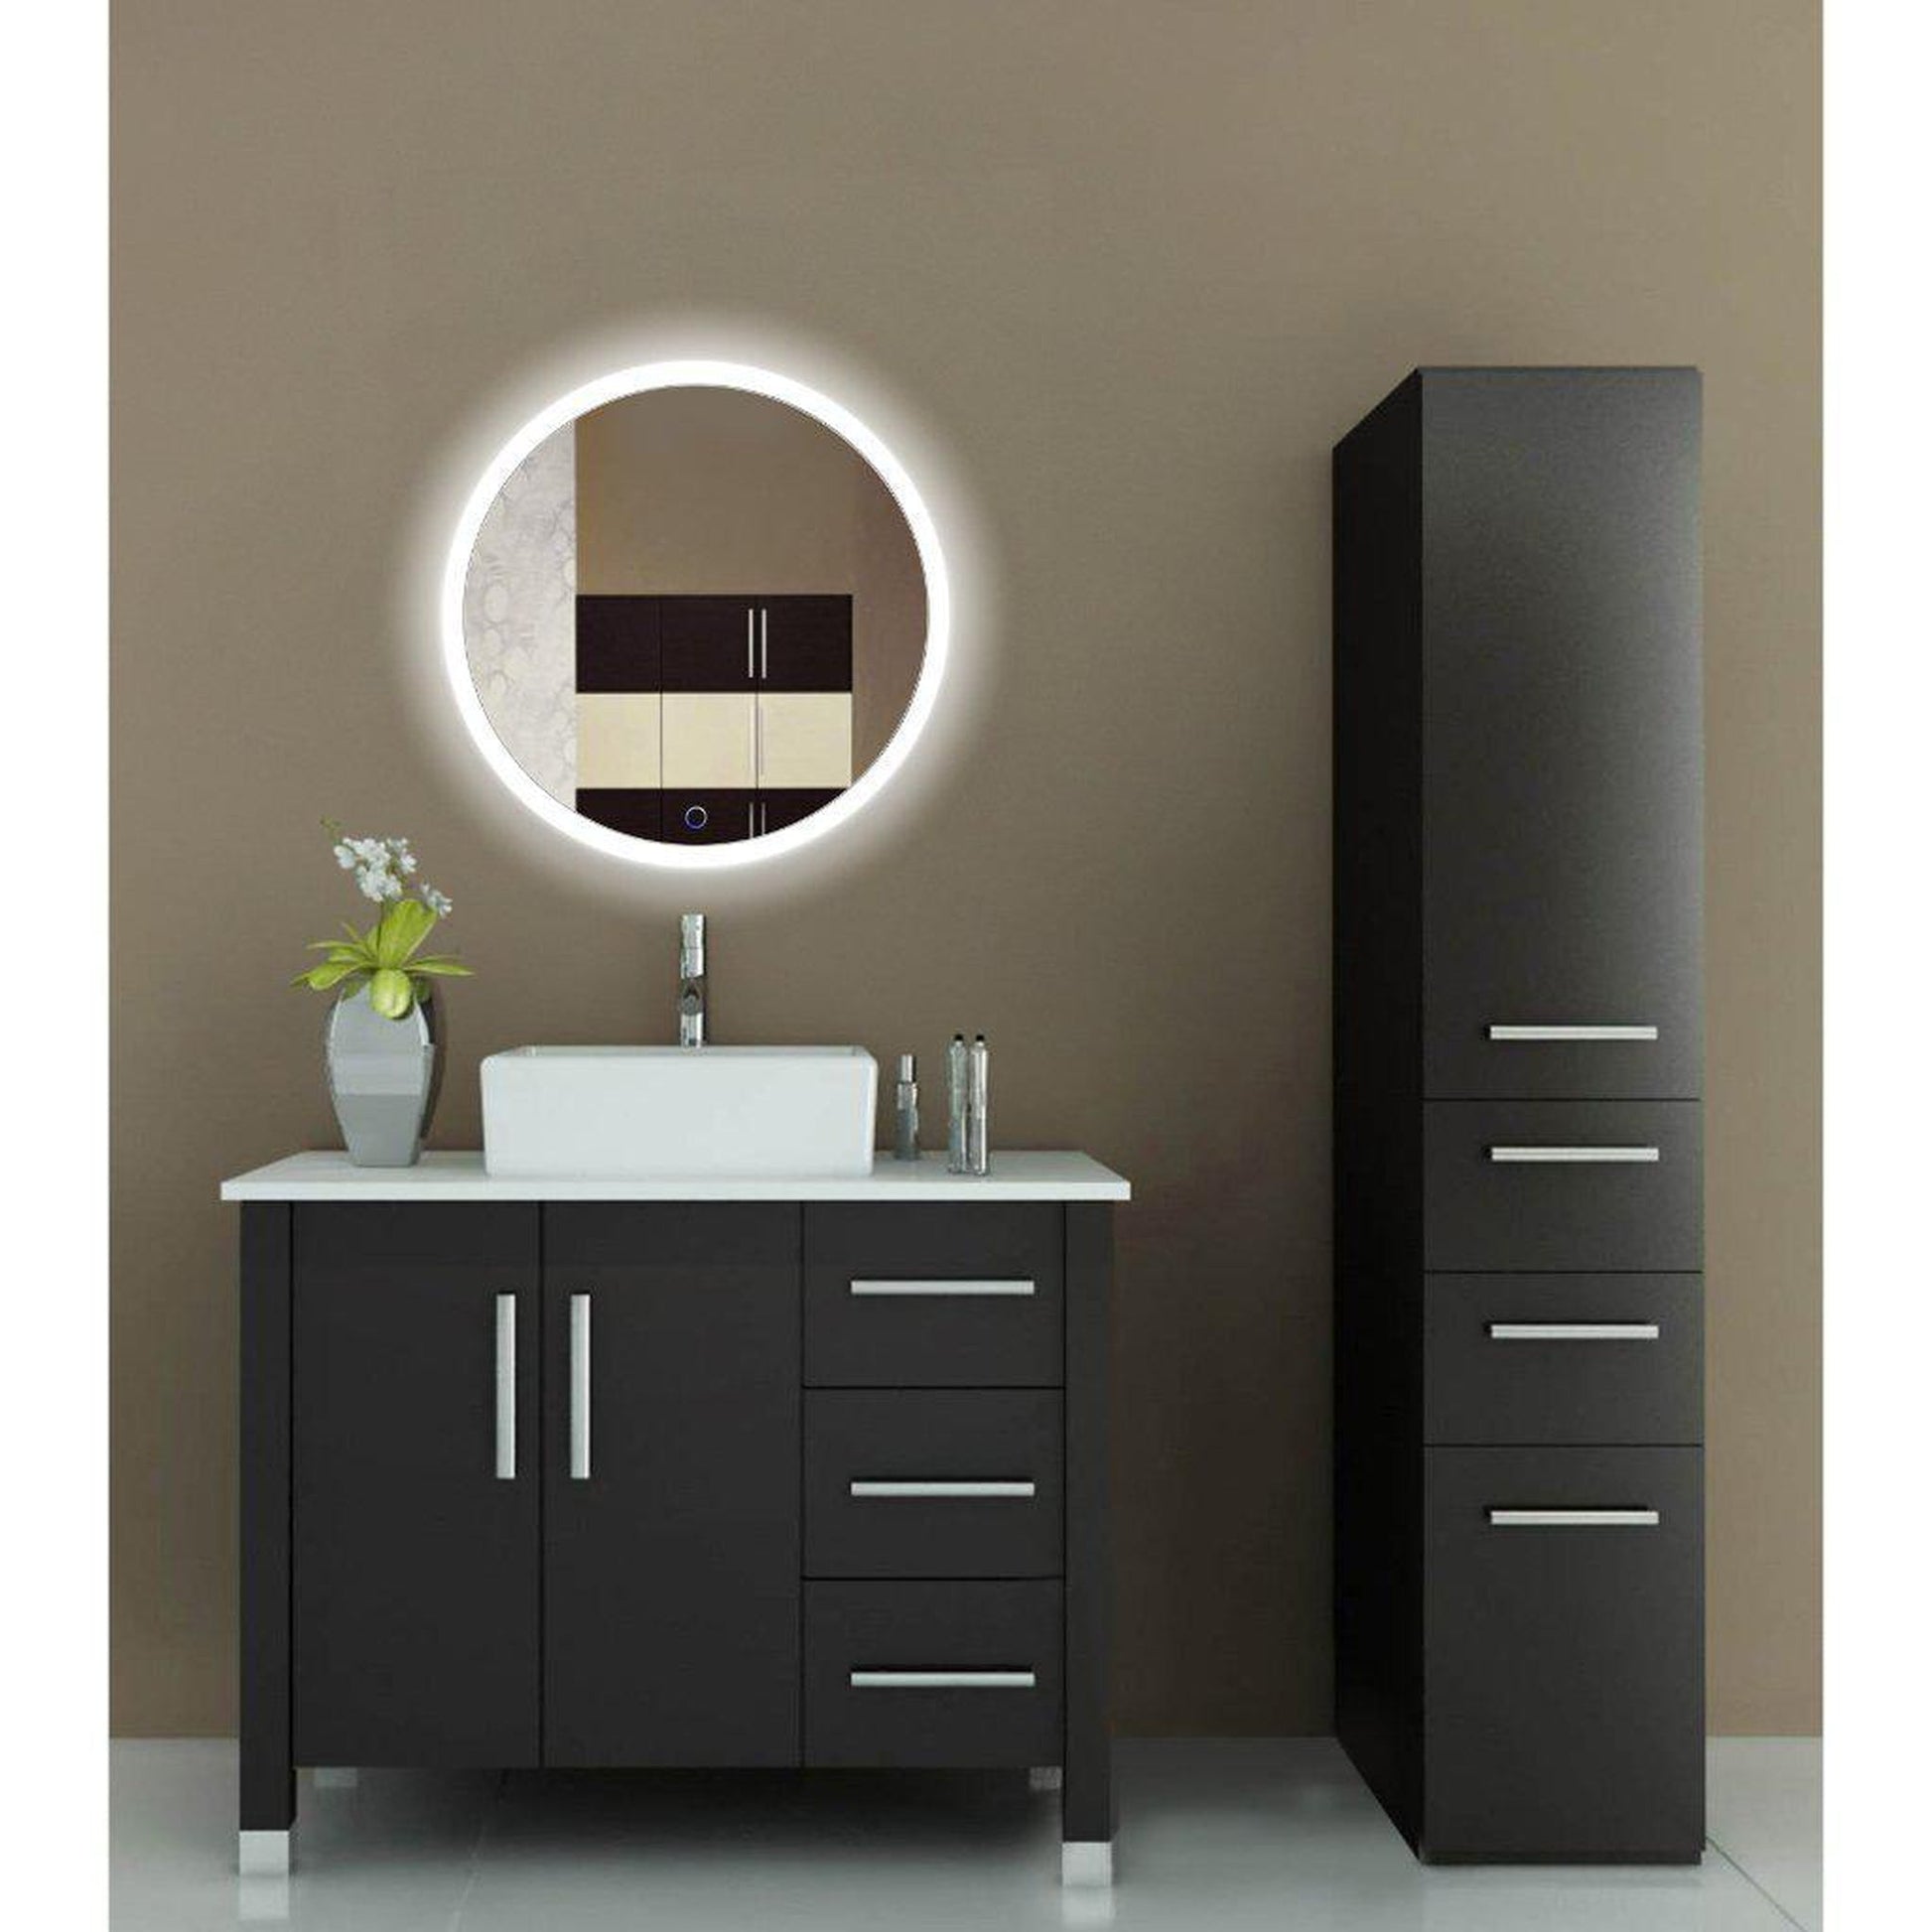 Krugg Reflections Sol 27" x 27" 5000K Round Wall-Mounted Illuminated Silver Backed LED Mirror With Built-in Defogger and Touch Sensor On/Off Built-in Dimmer